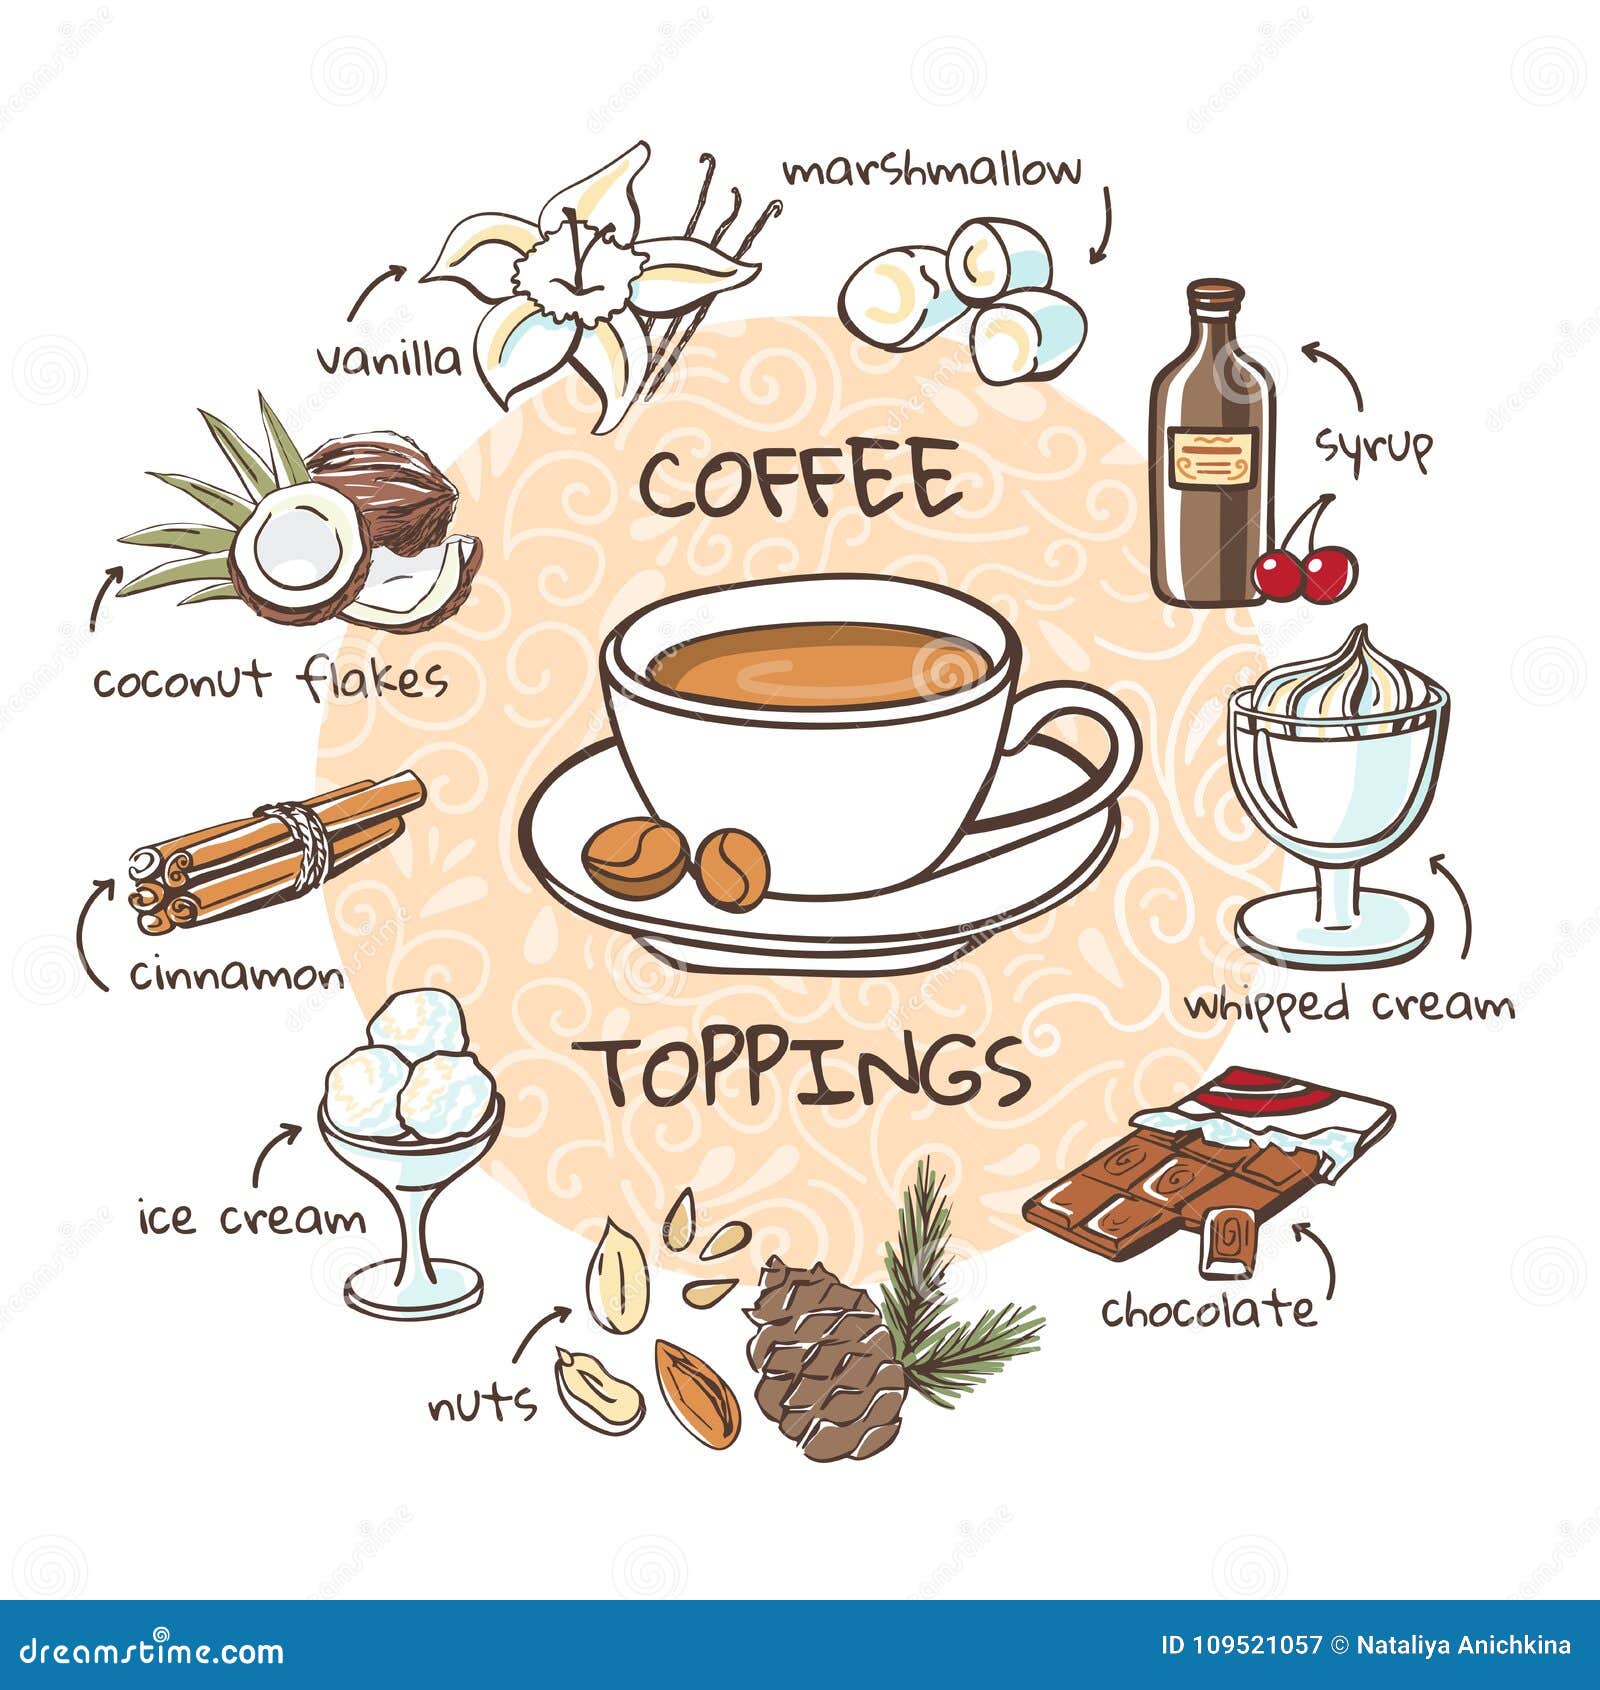 https://thumbs.dreamstime.com/z/coffee-toppings-vector-illustration-soft-drink-additives-hand-drawn-cup-hot-beverage-doodle-ingredients-recipe-109521057.jpg